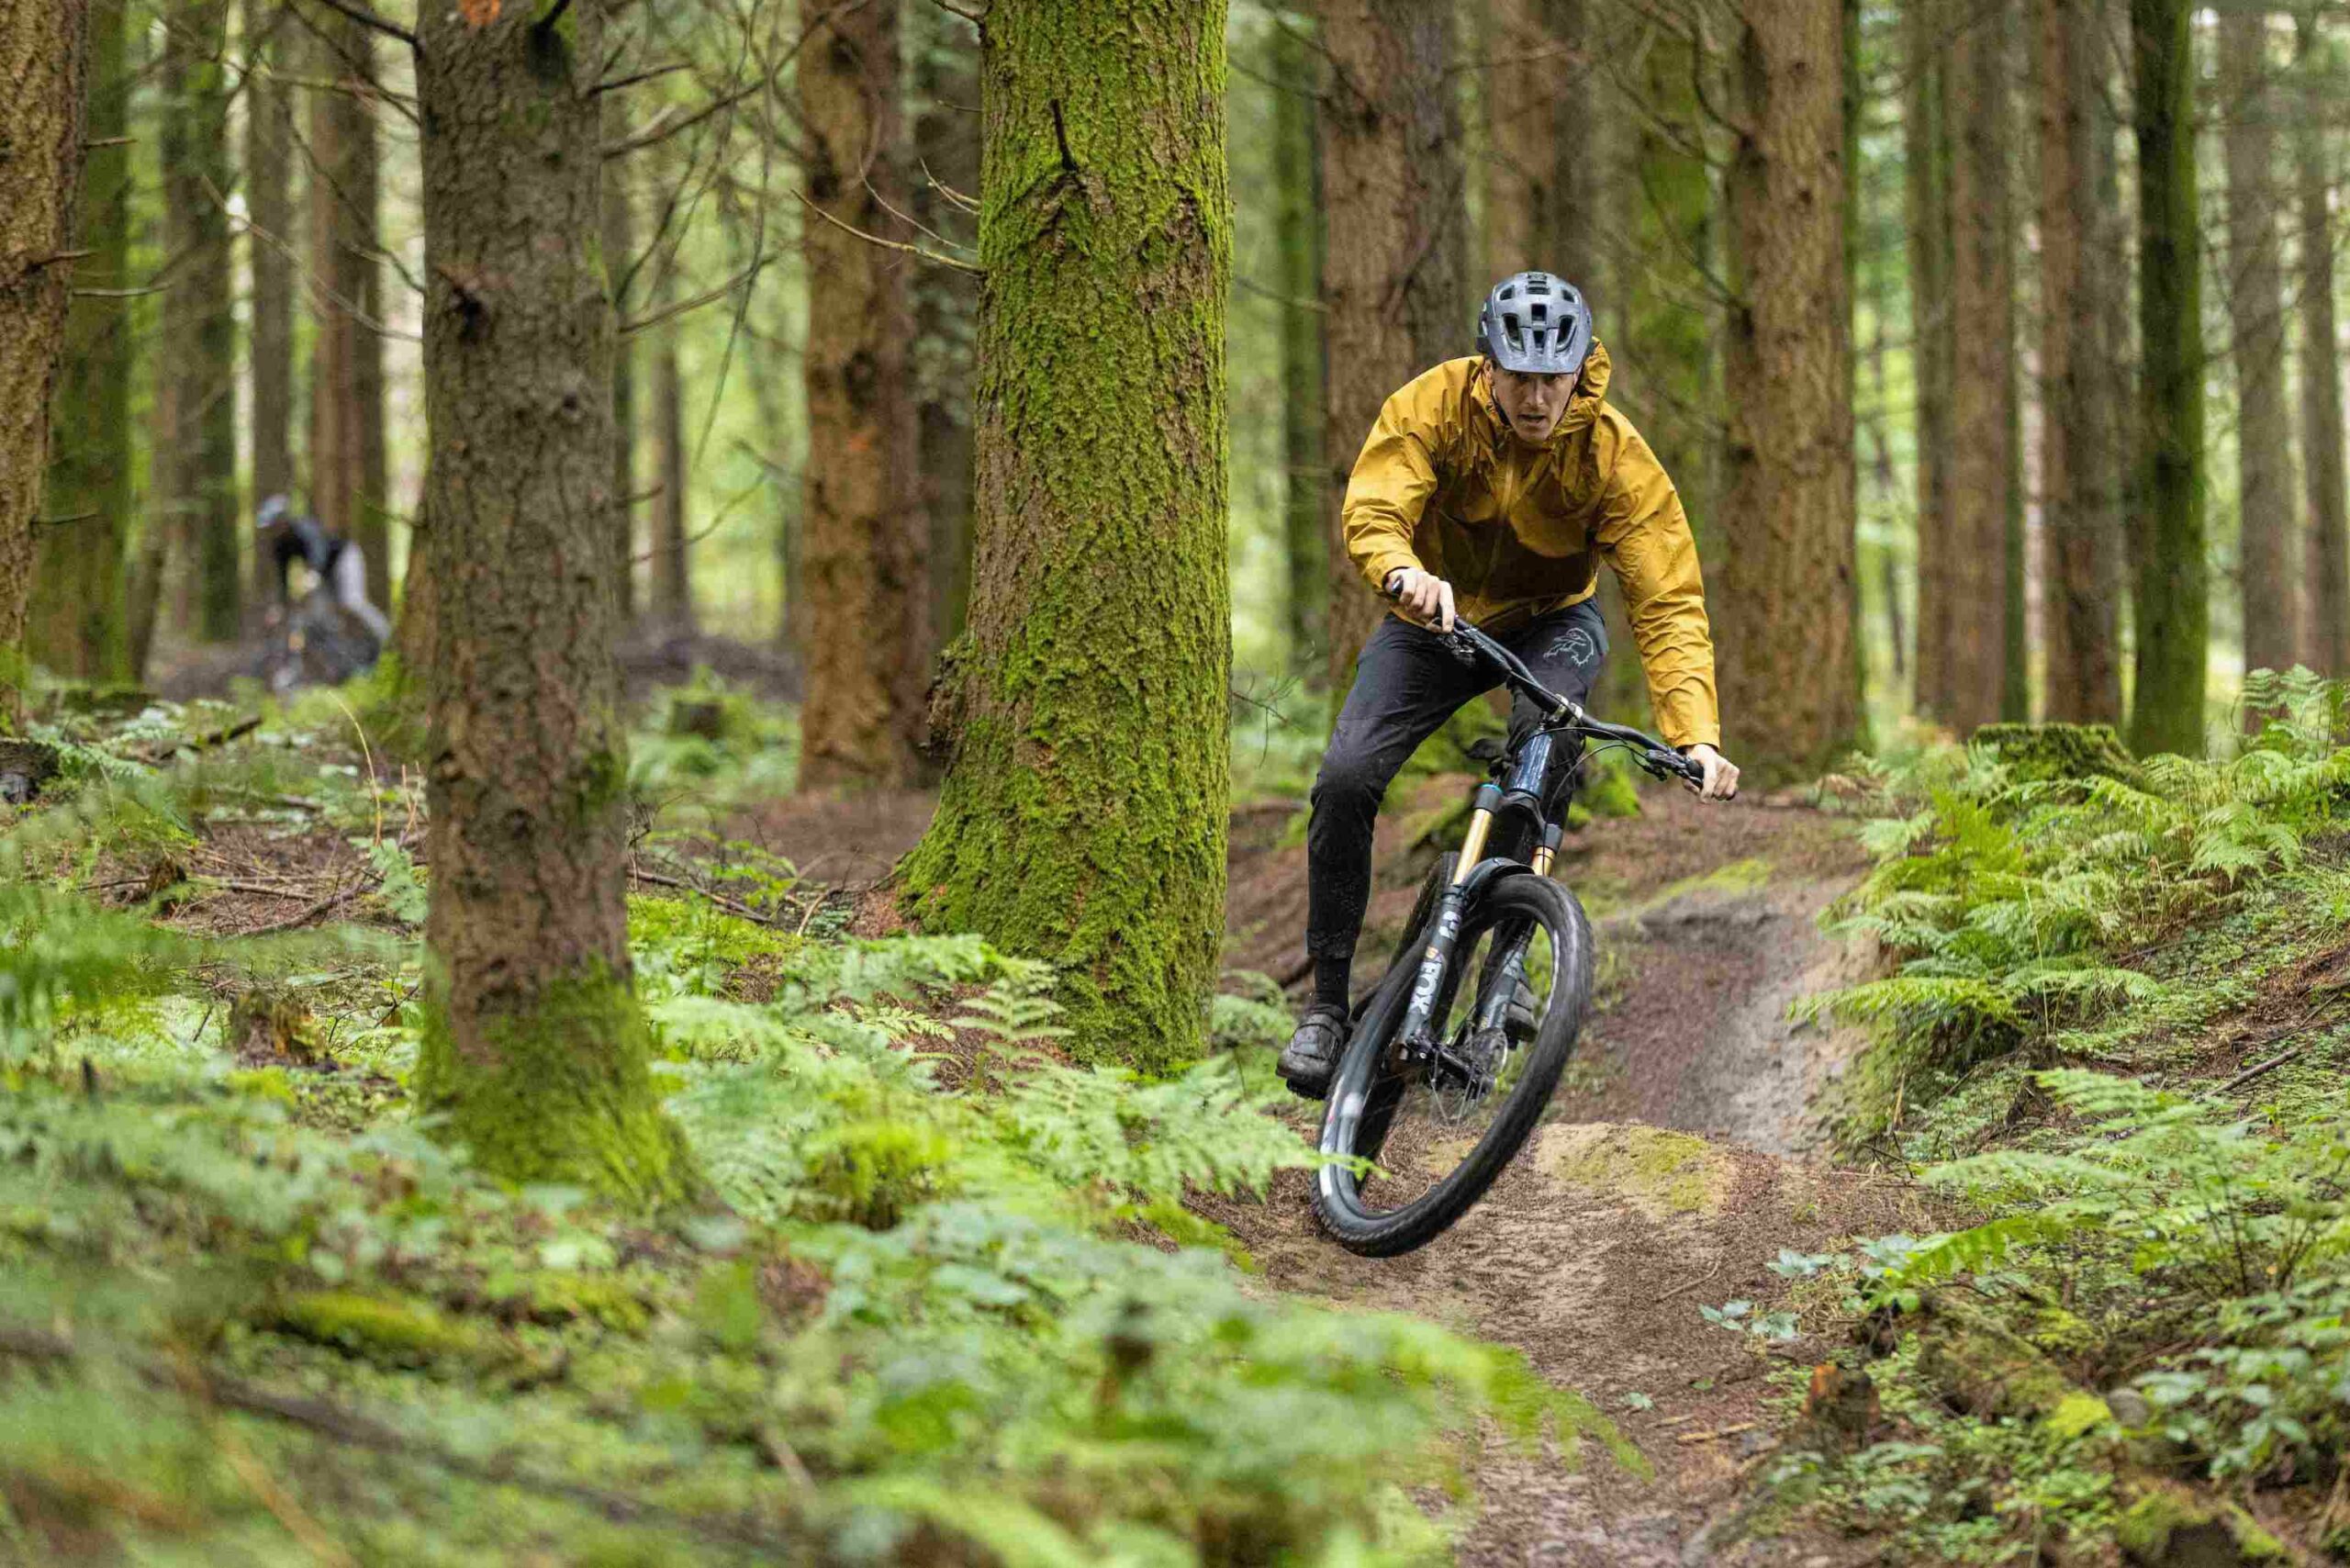 Riding in the Rab Cinder Downpour jacket before a downpour on the YT Jeffsey launch 